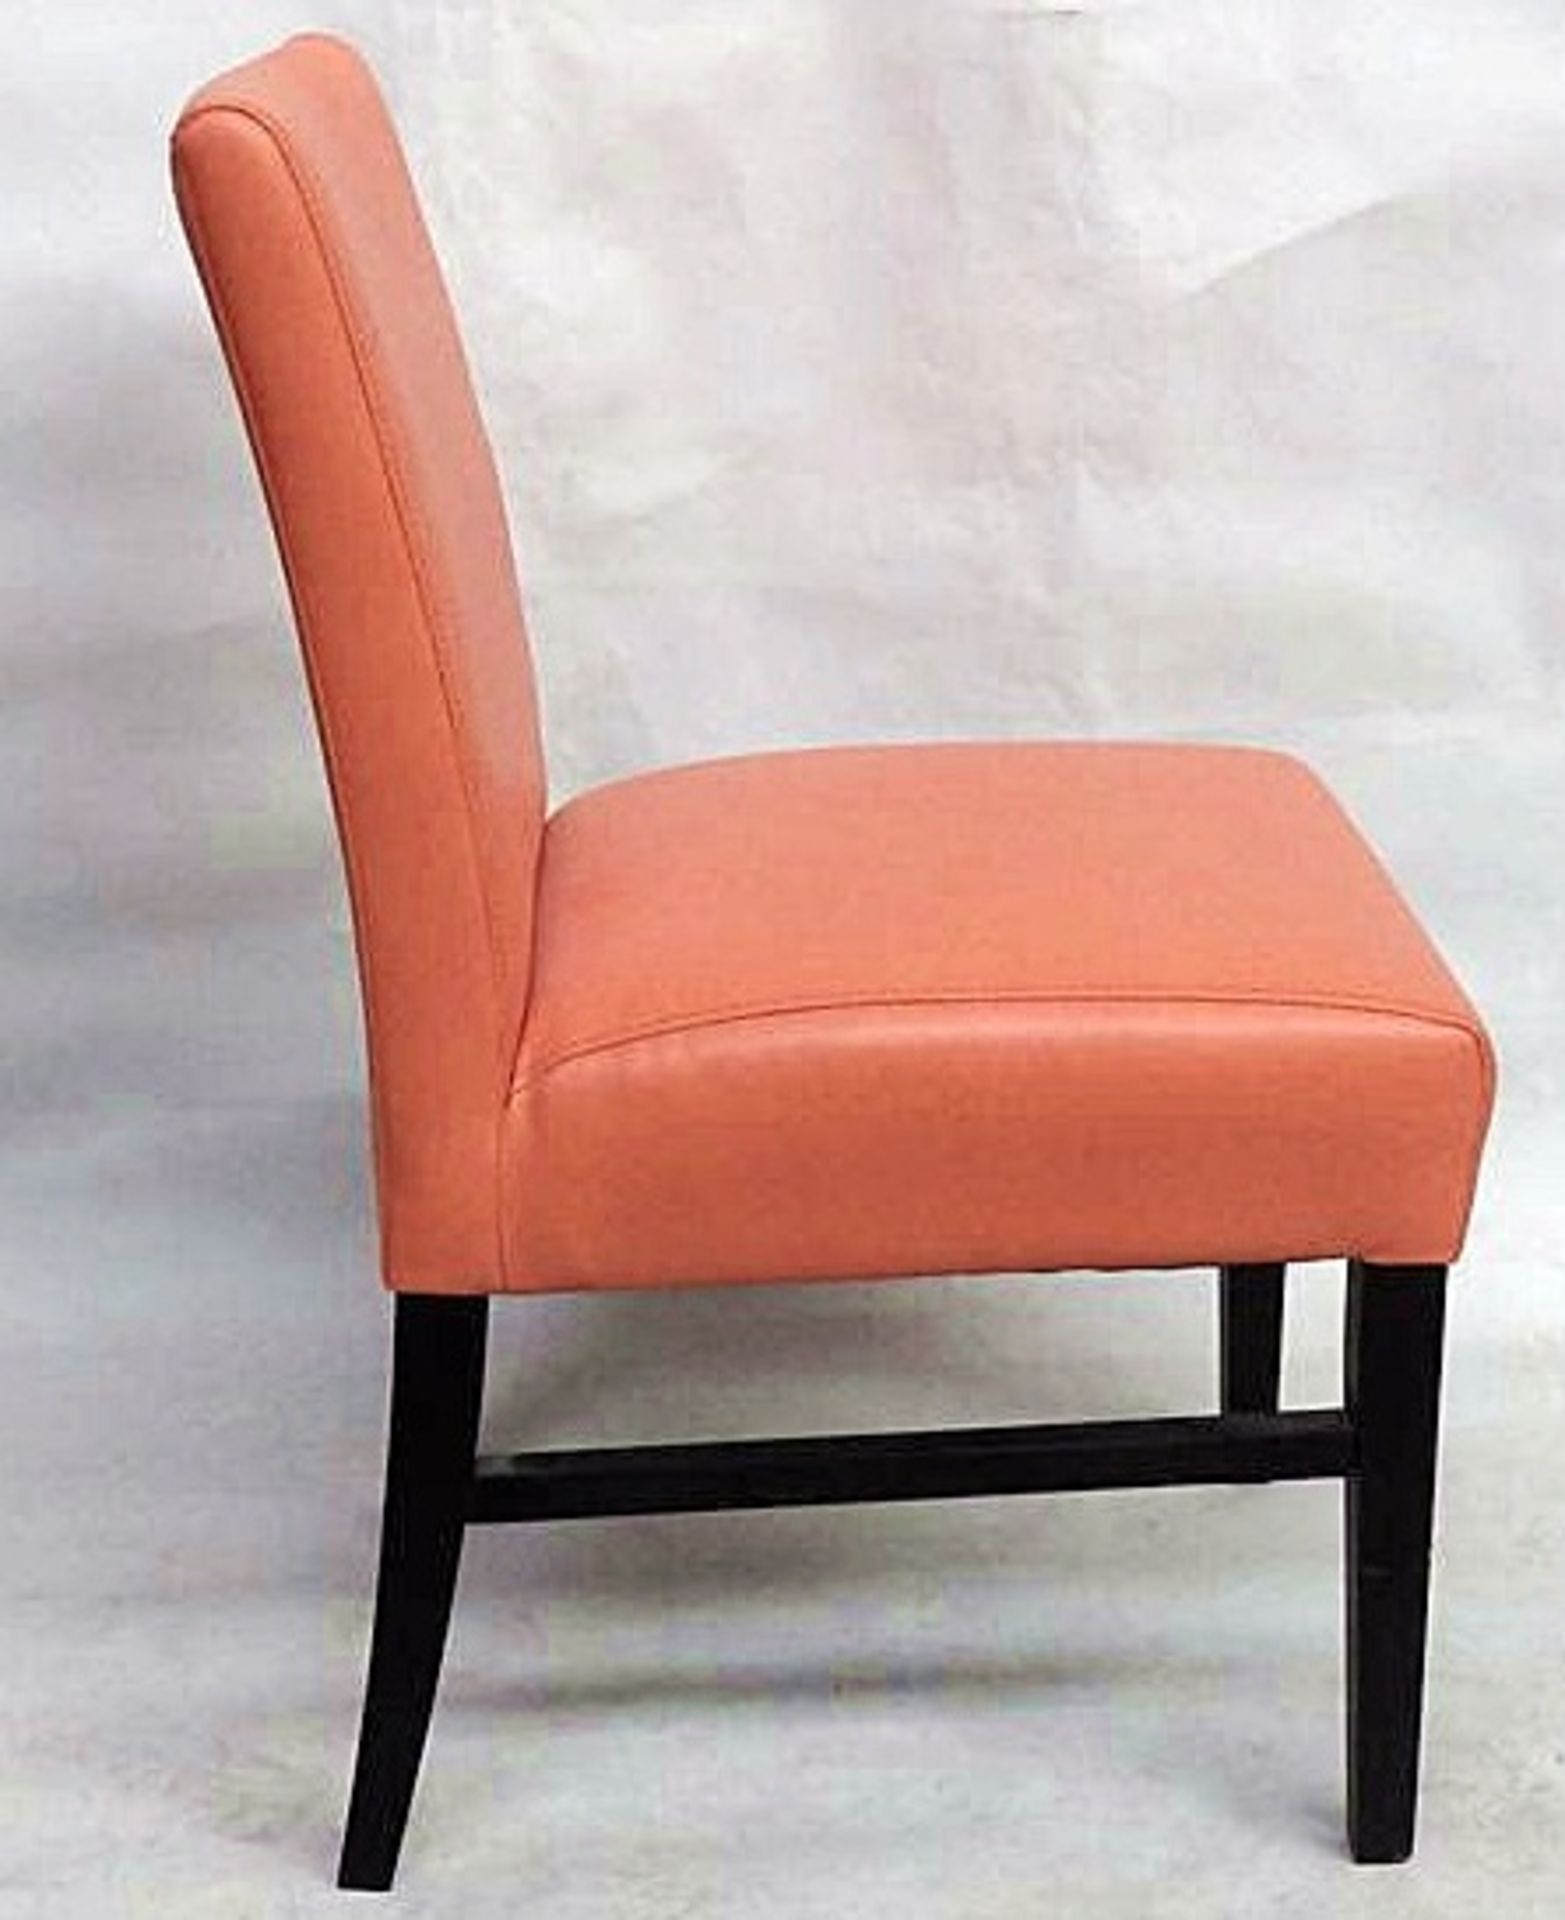 1 x Bright Orange Soft Leather Chair - Handcrafted & Upholstered By British Craftsmen - - Image 2 of 5